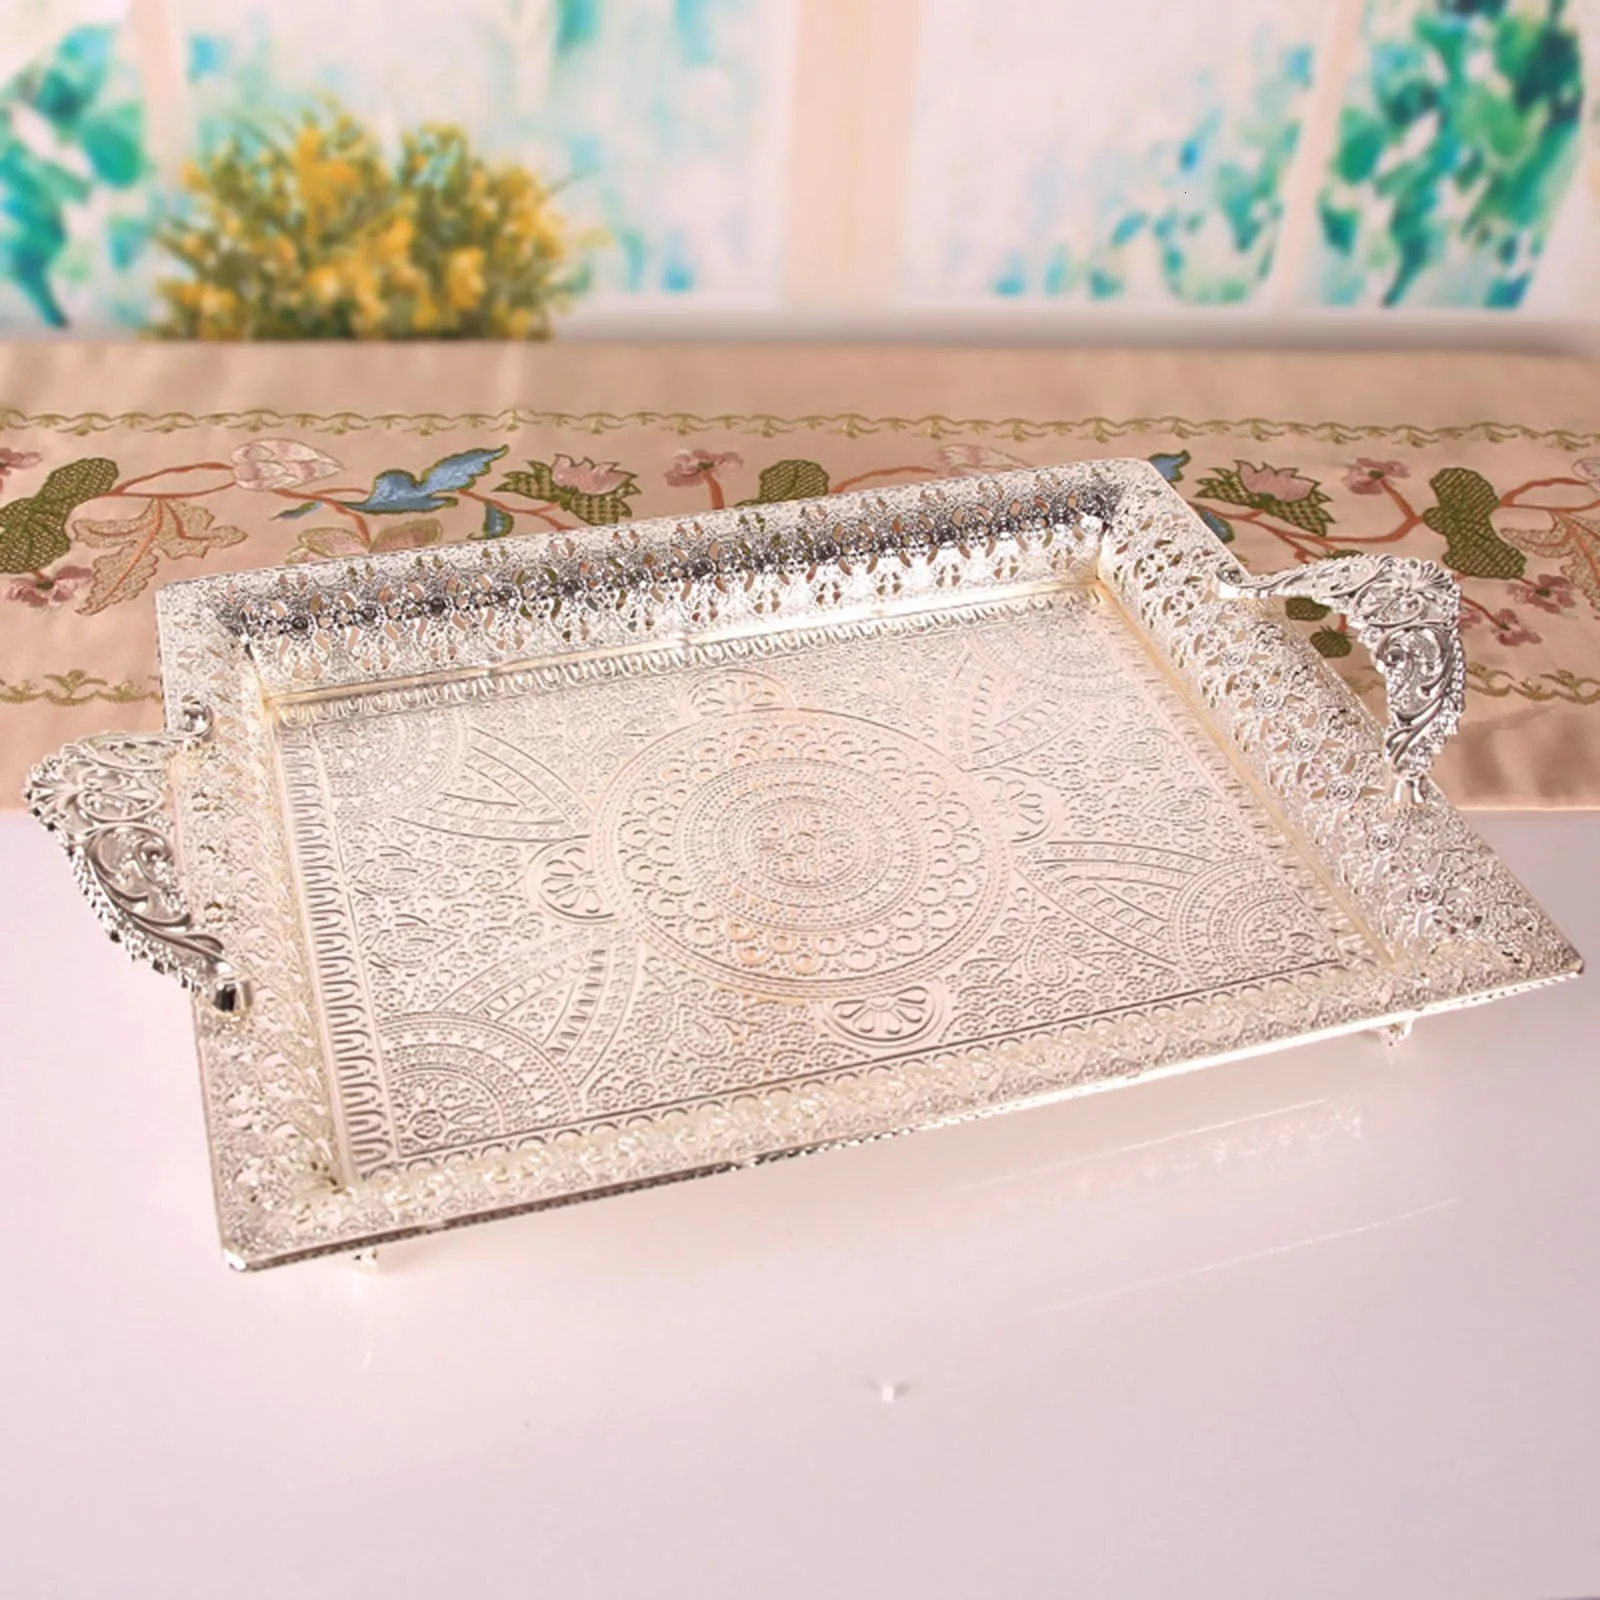 Multifunctional Serving Tray, Fruit Plate Dishes Platter Vanity Tray Decorative Tray Jewelry Tray for Dressing Room Office Decor